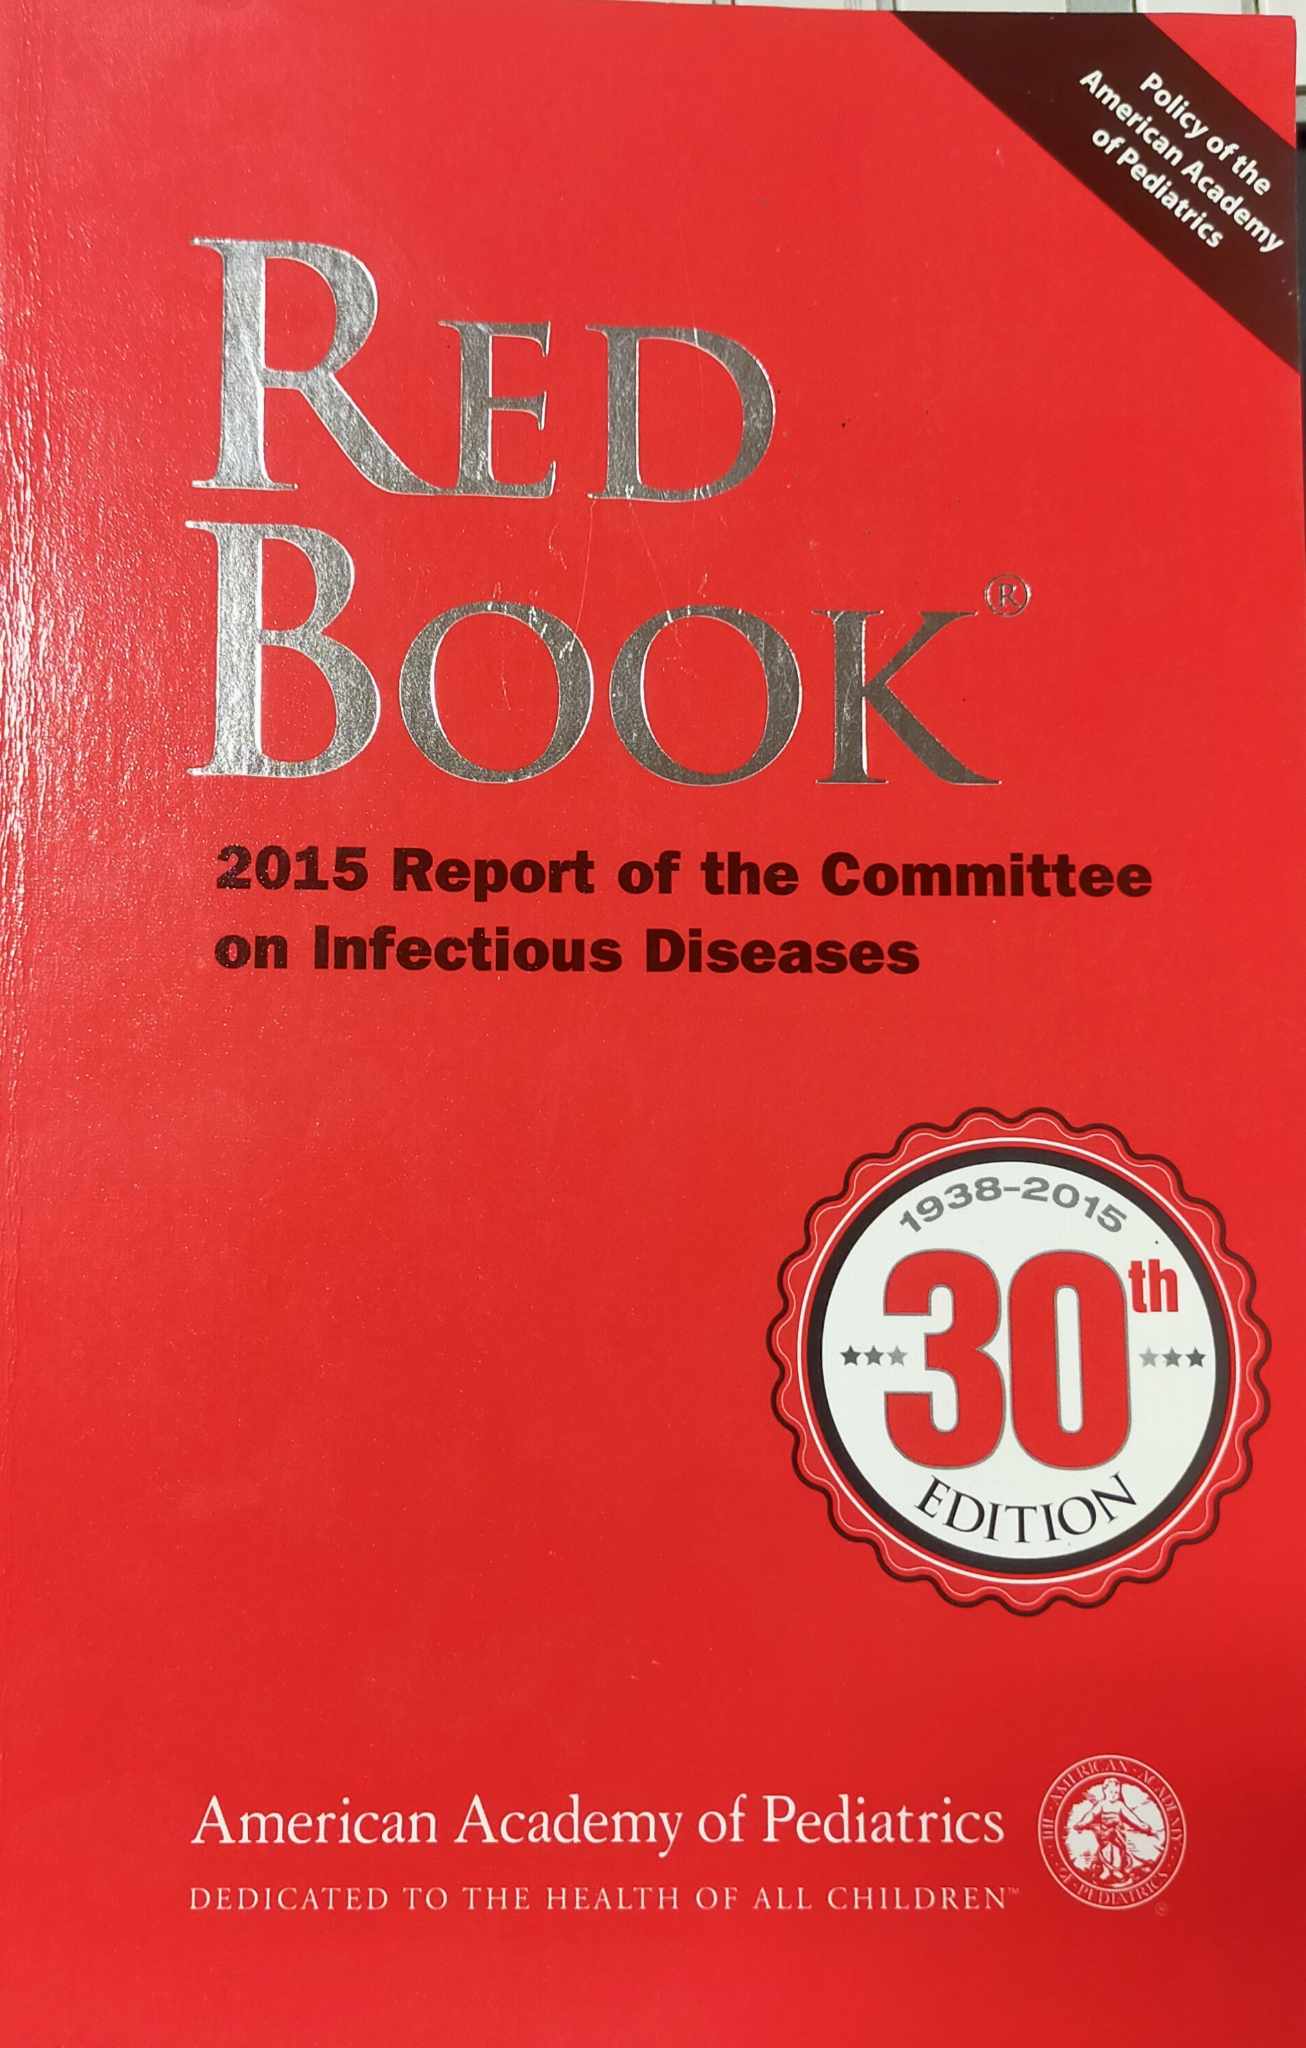 Red book 2015 report of the Committee on Infectious Diseases